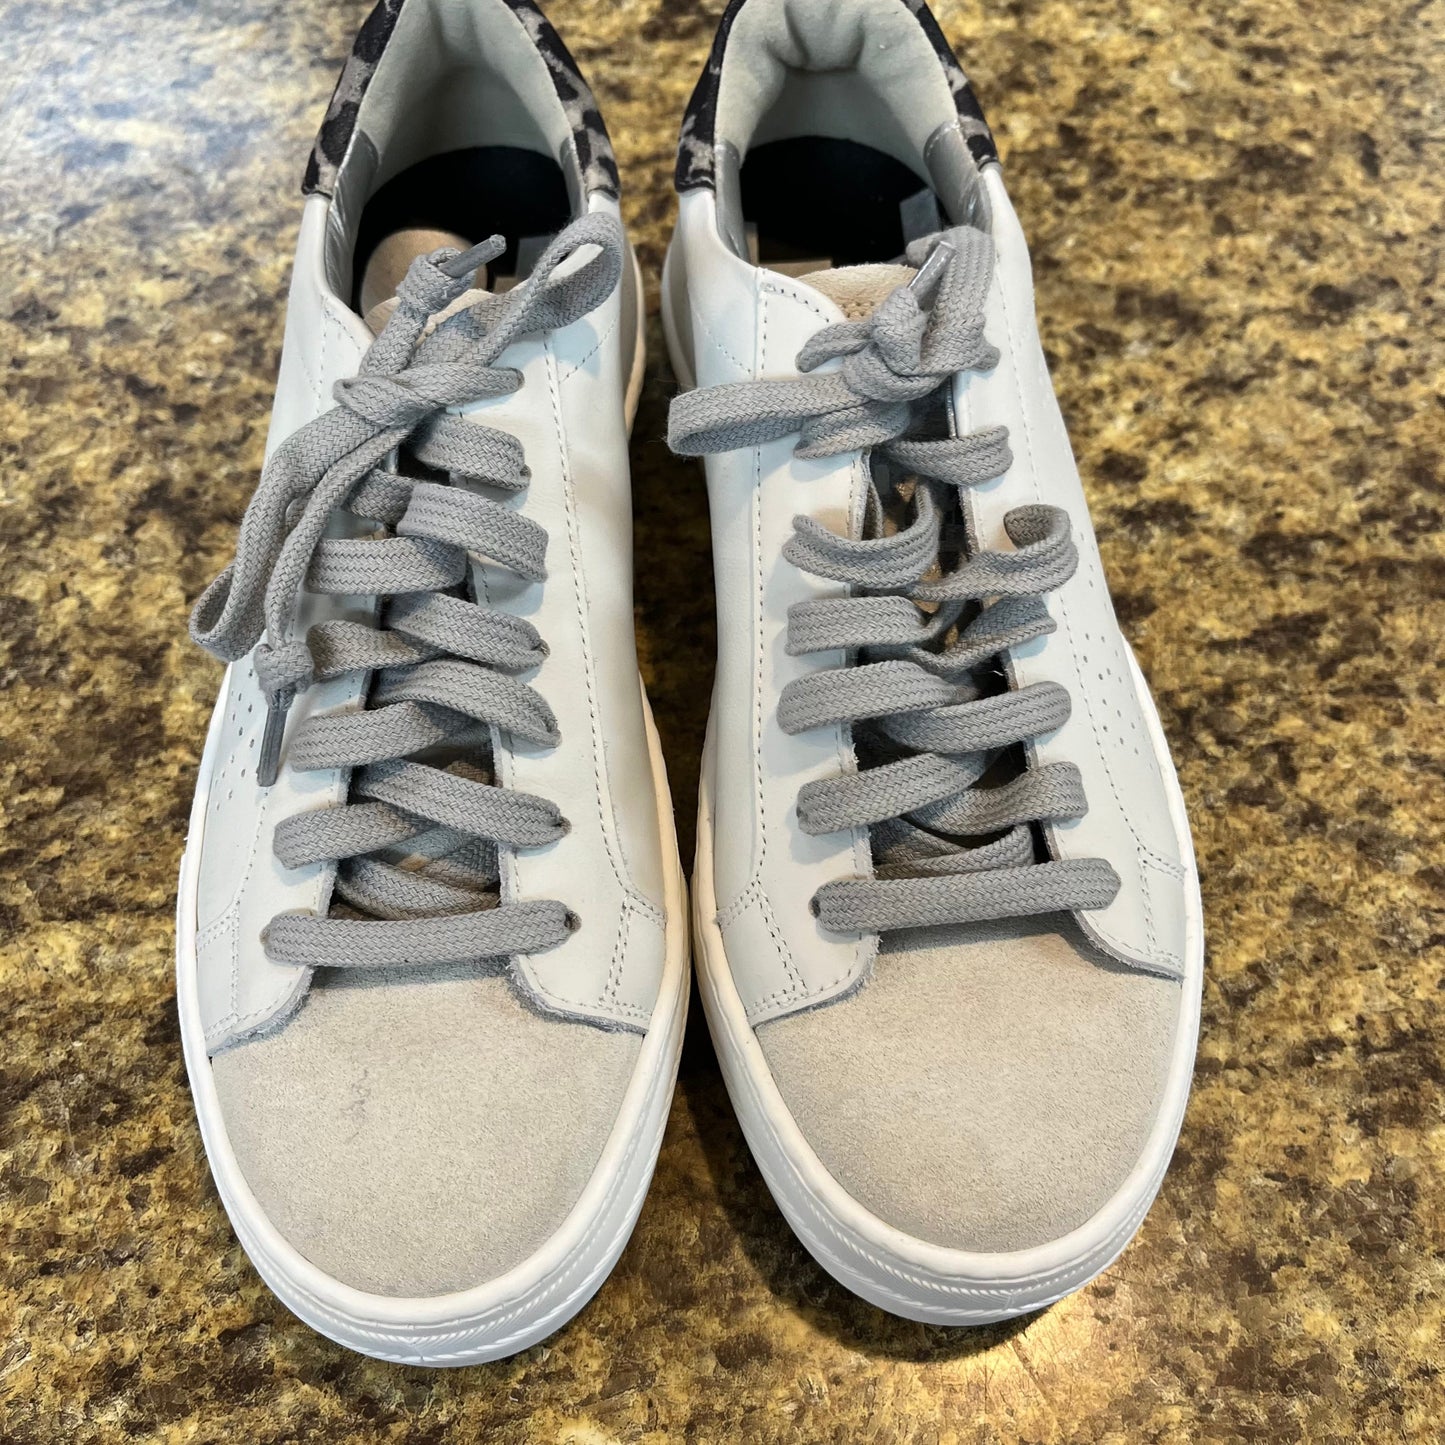 Grey Shoes Sneakers P448, Size 5.5